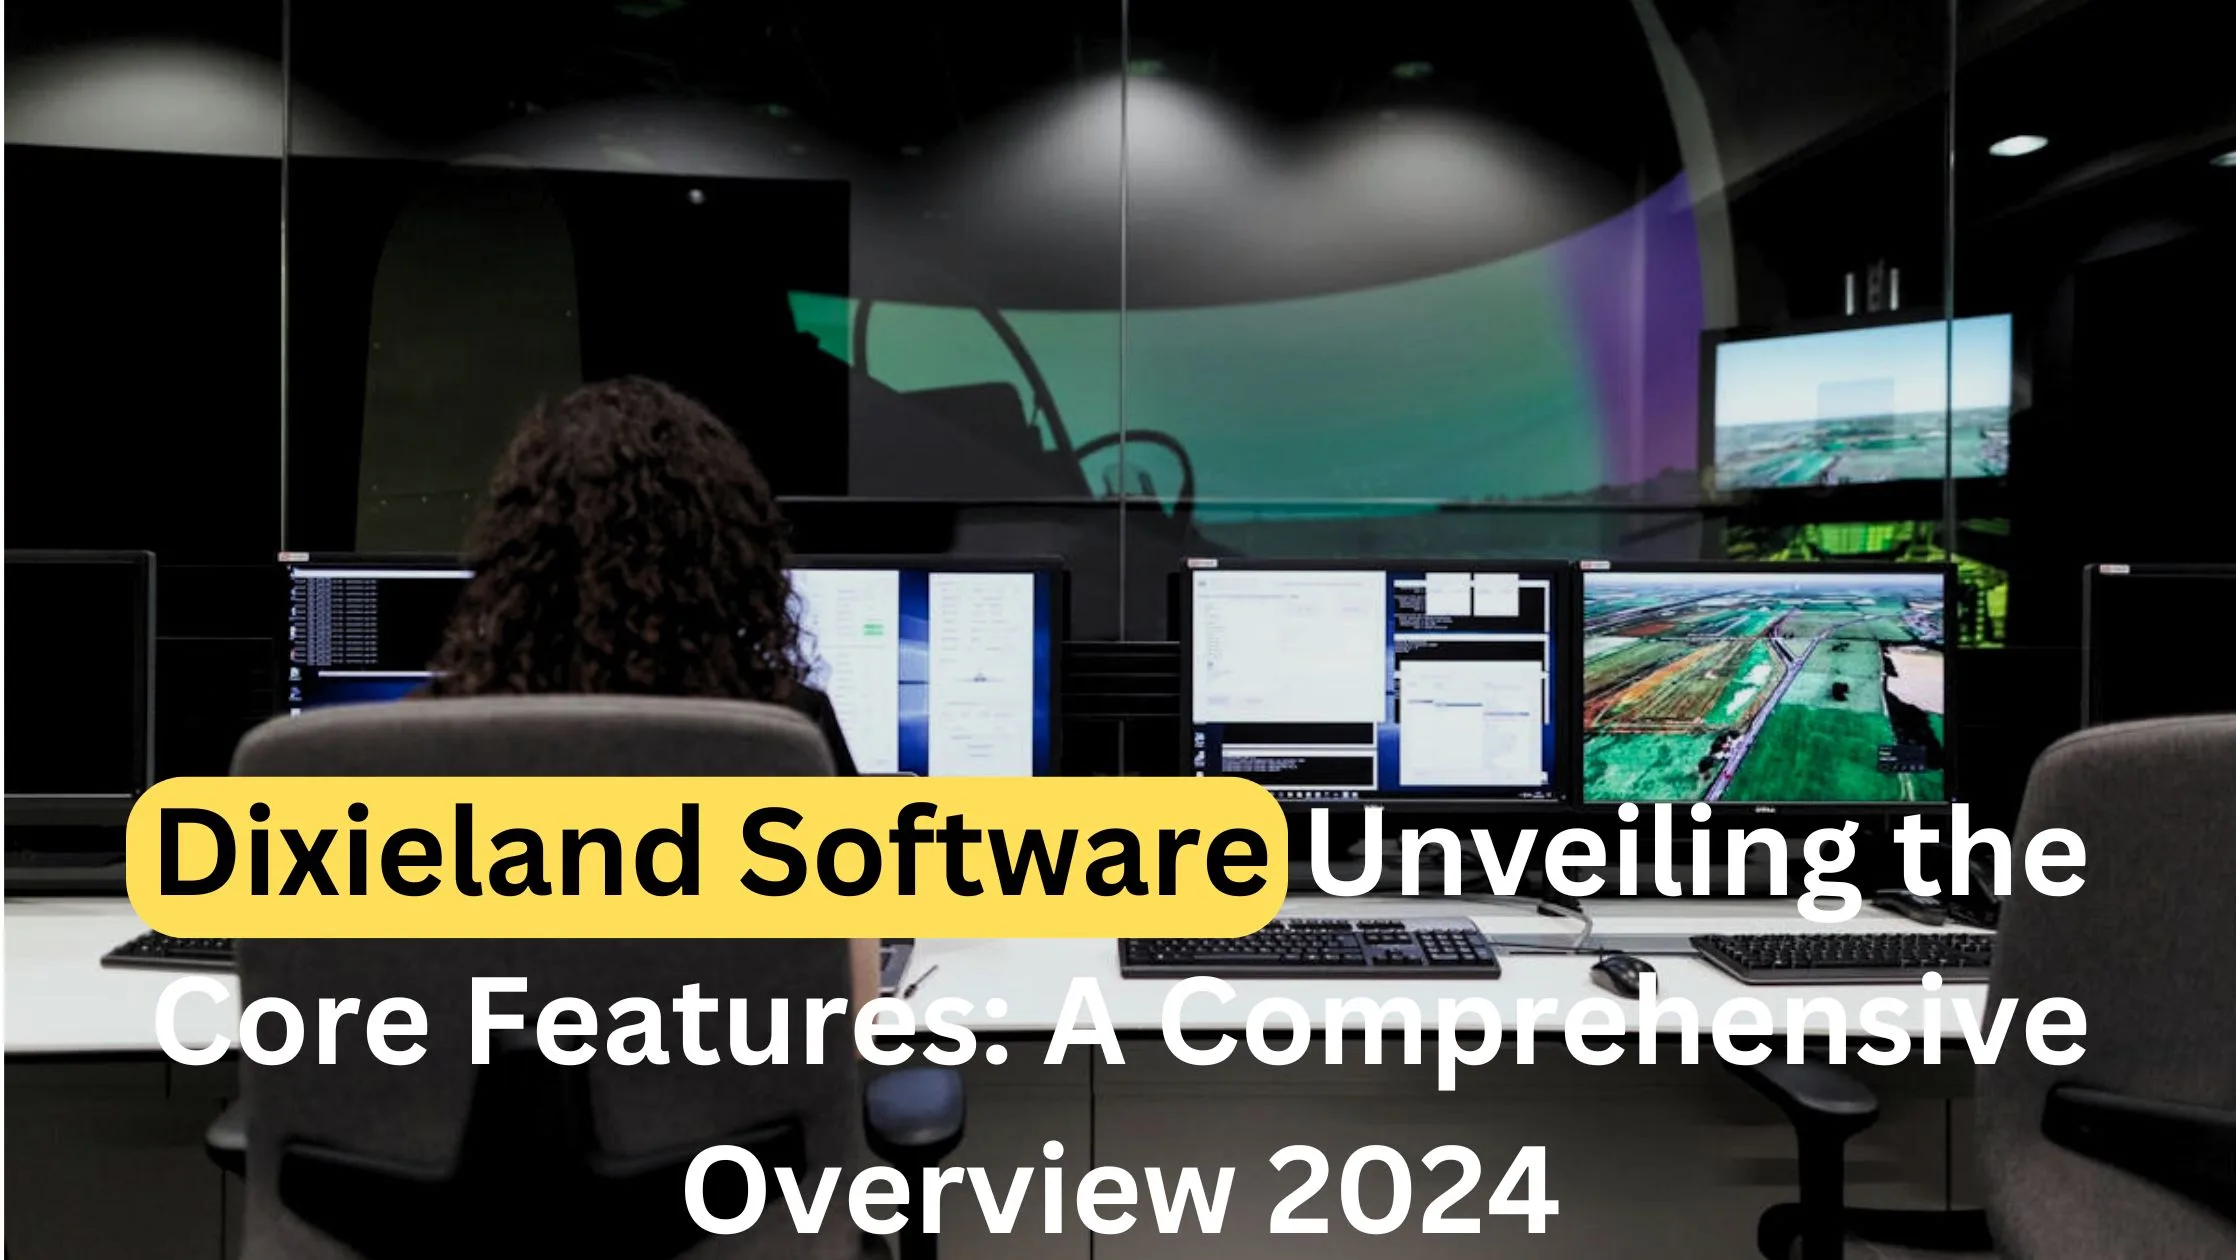 Dixieland Software Unveiling the Core Features: A Comprehensive Overview 2024